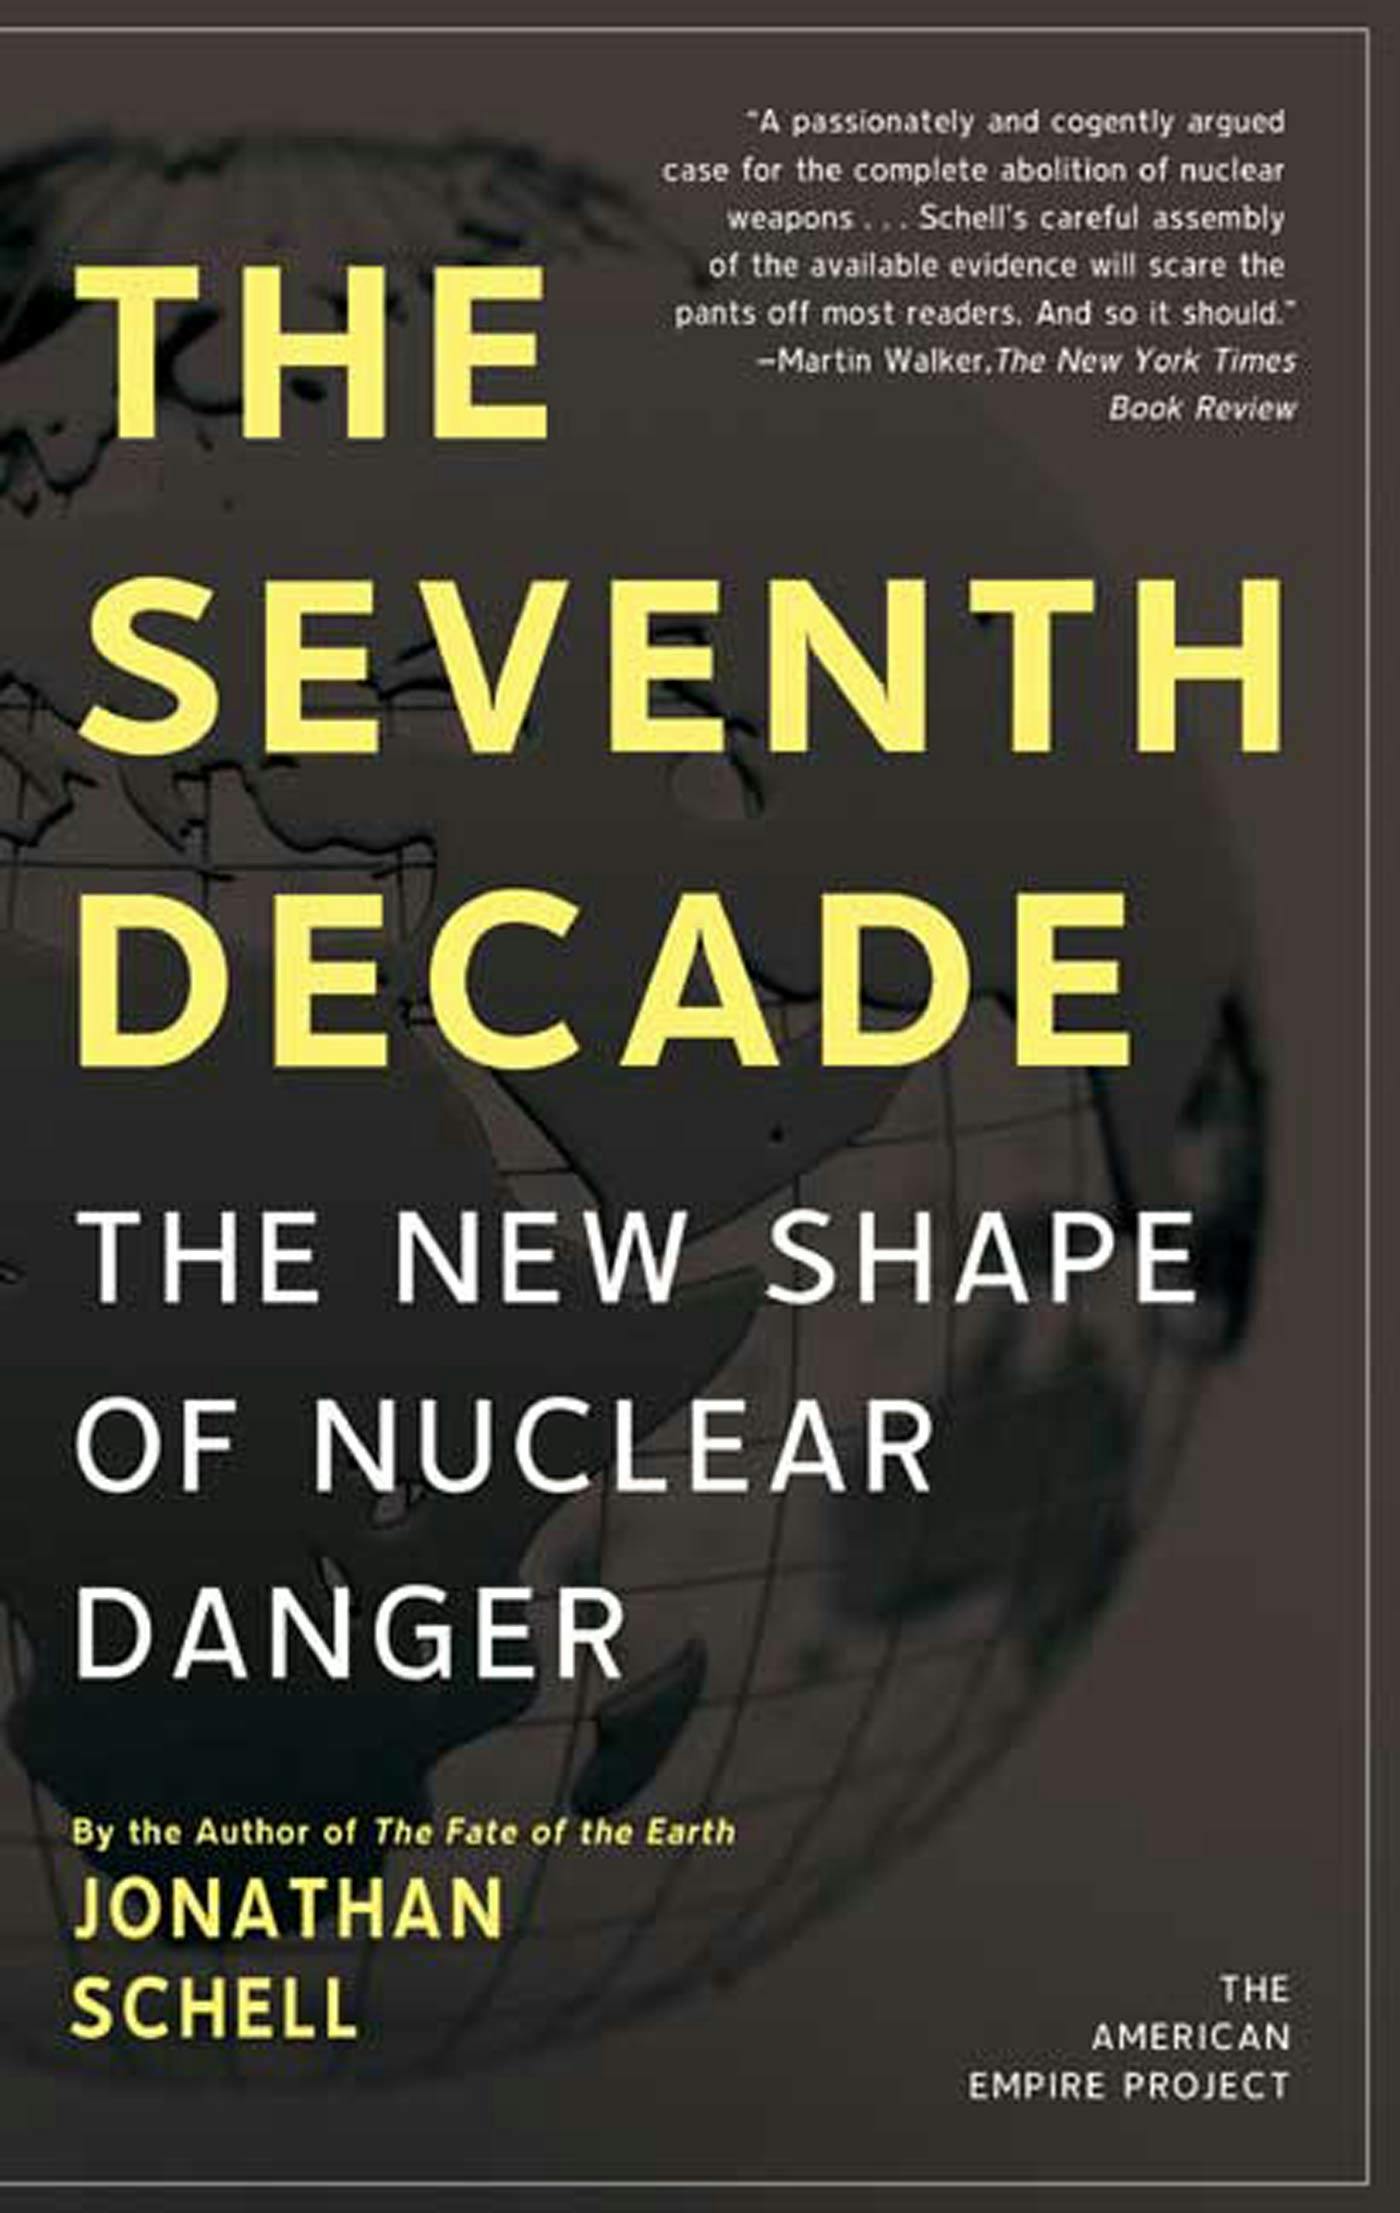 Image of The Seventh Decade